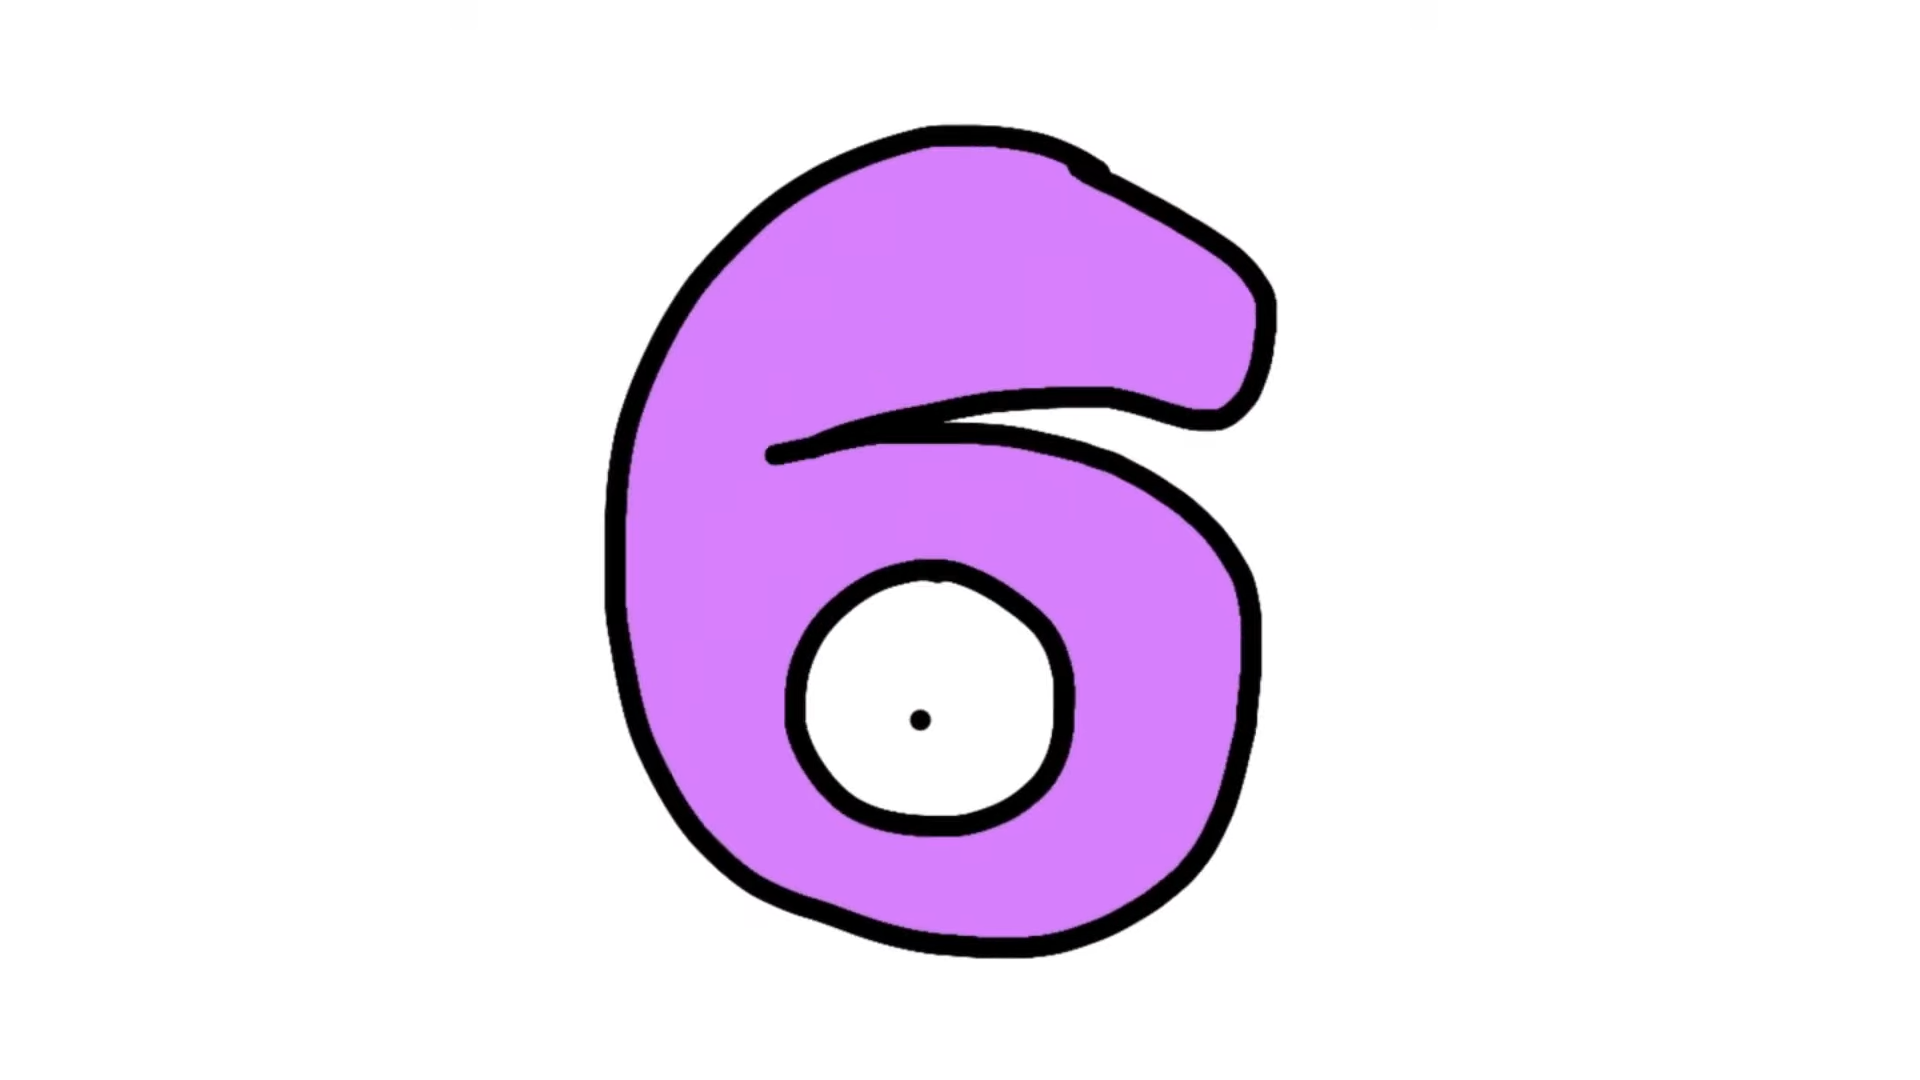 number 6 png